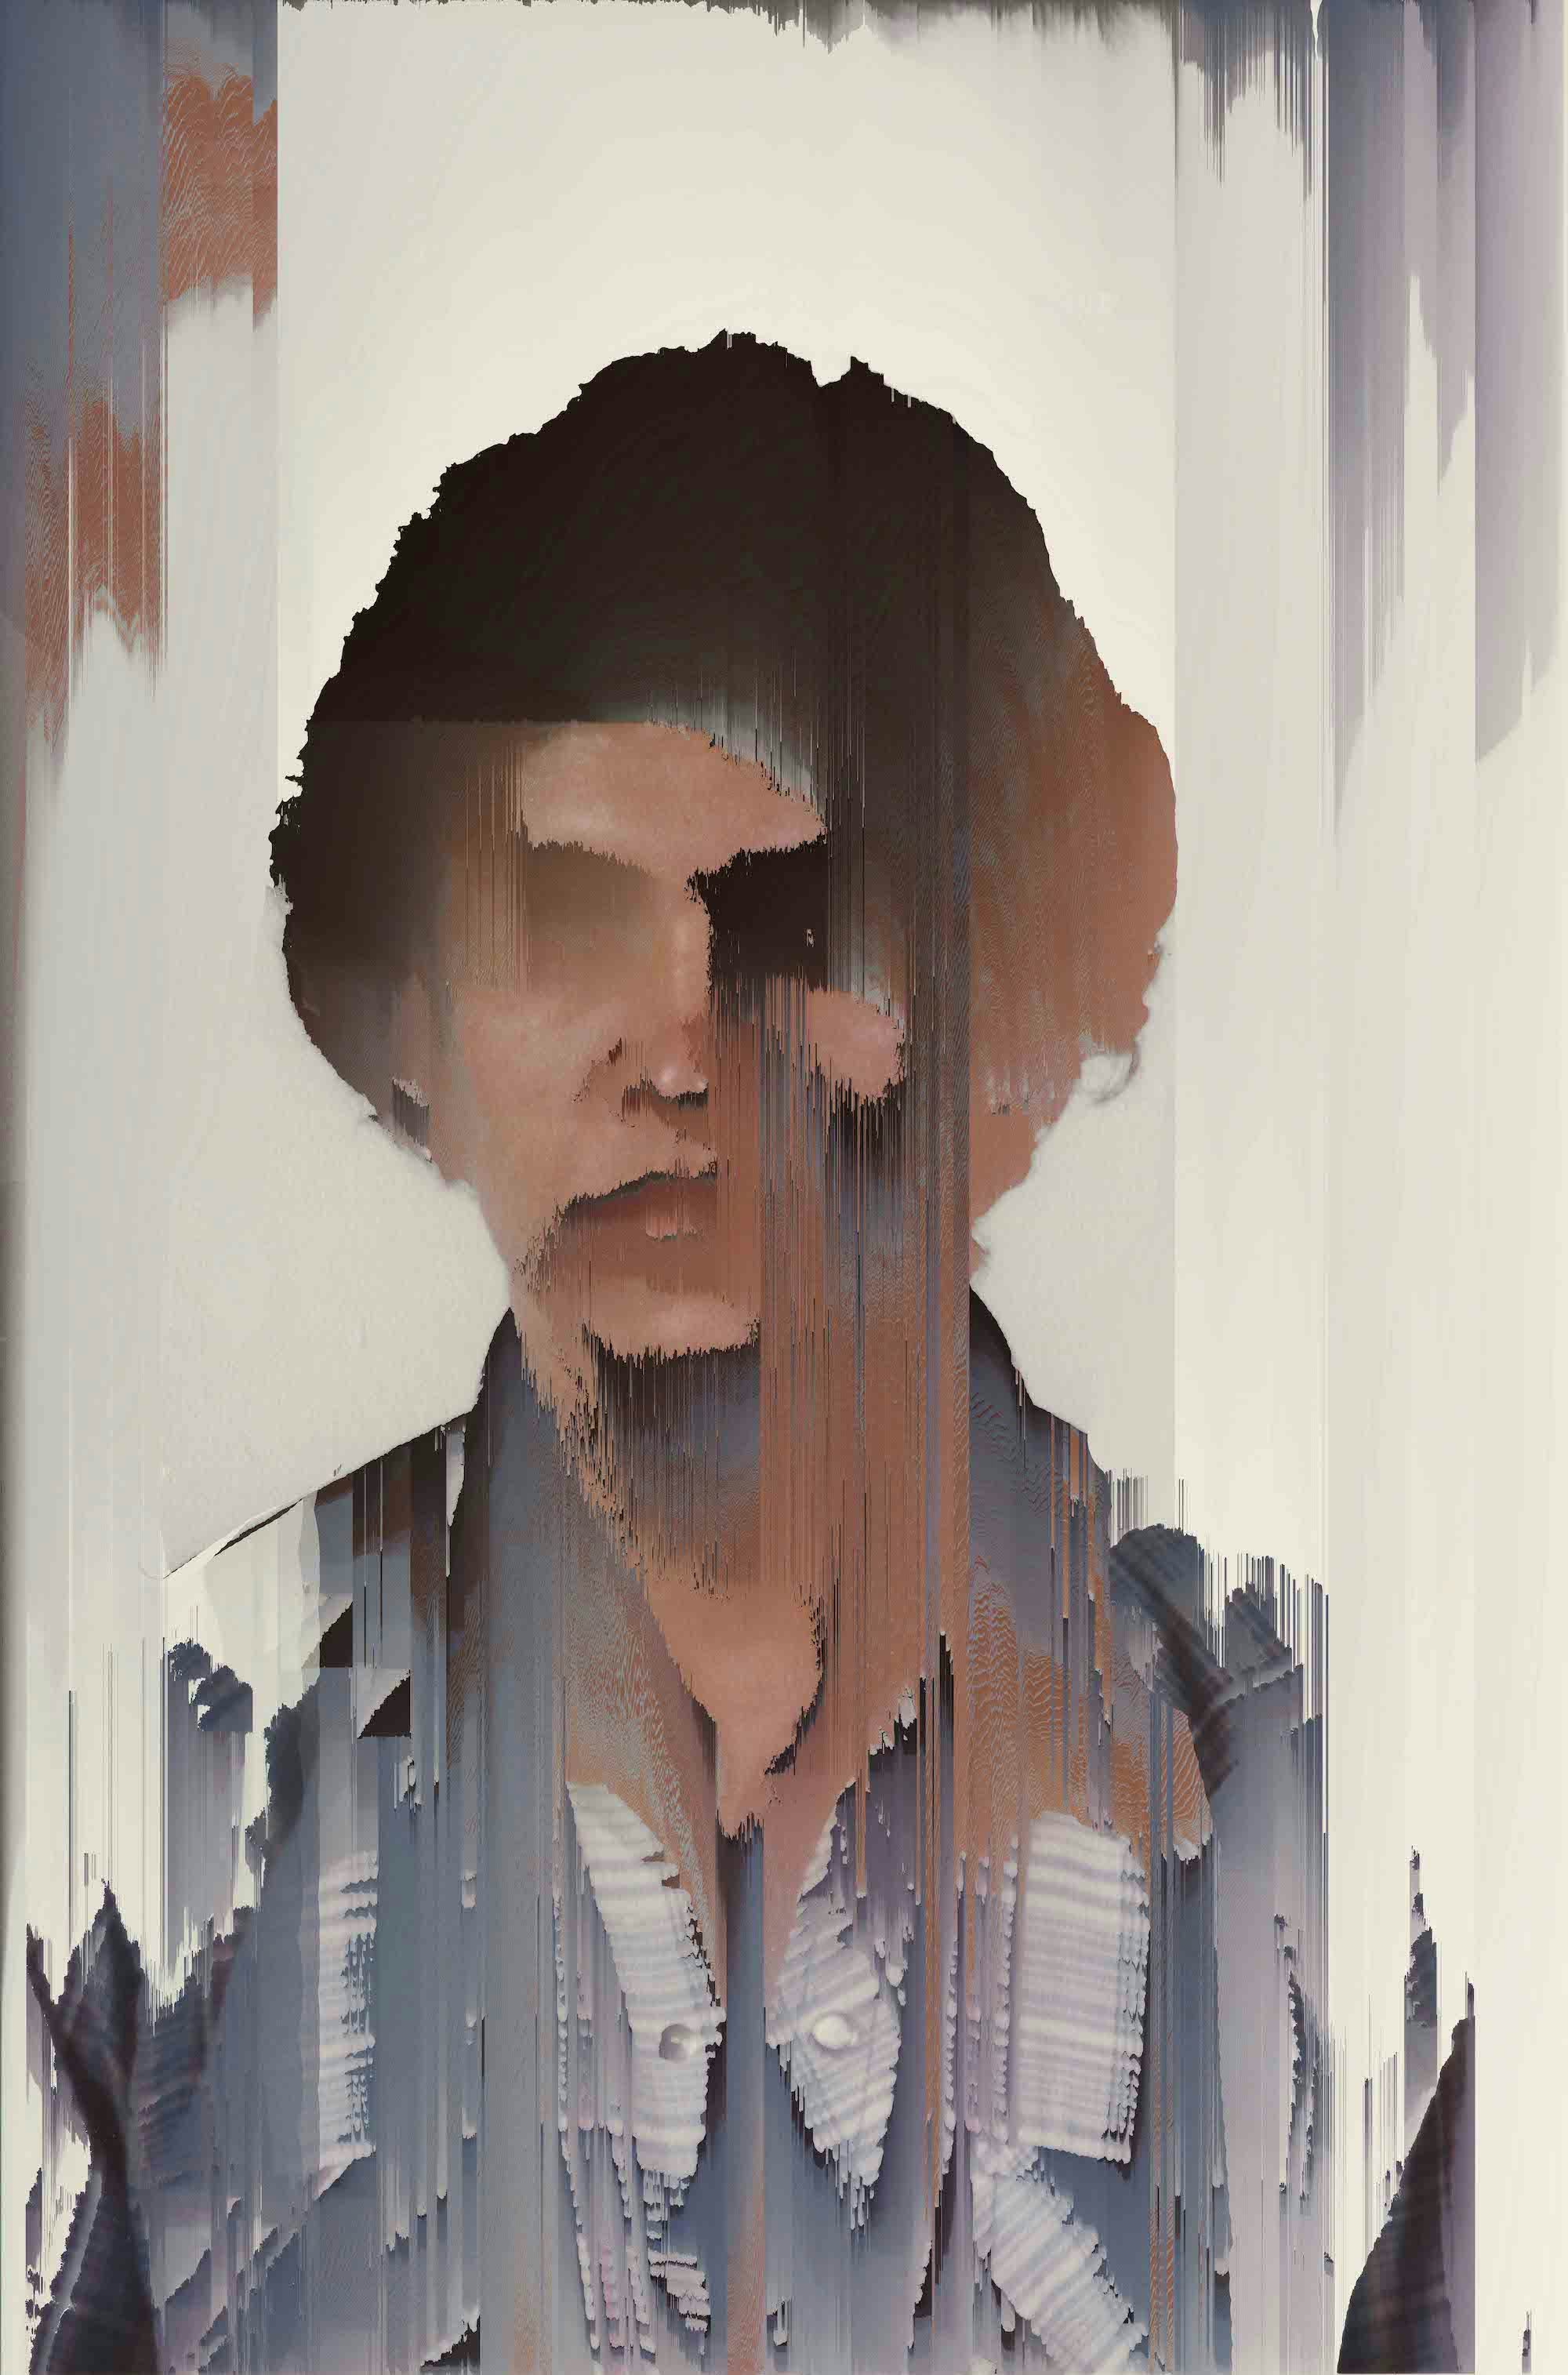 Archival portrait of the artist's father, with manipulated pixels wiping out the face © Cristóbal Ascencio Ramos